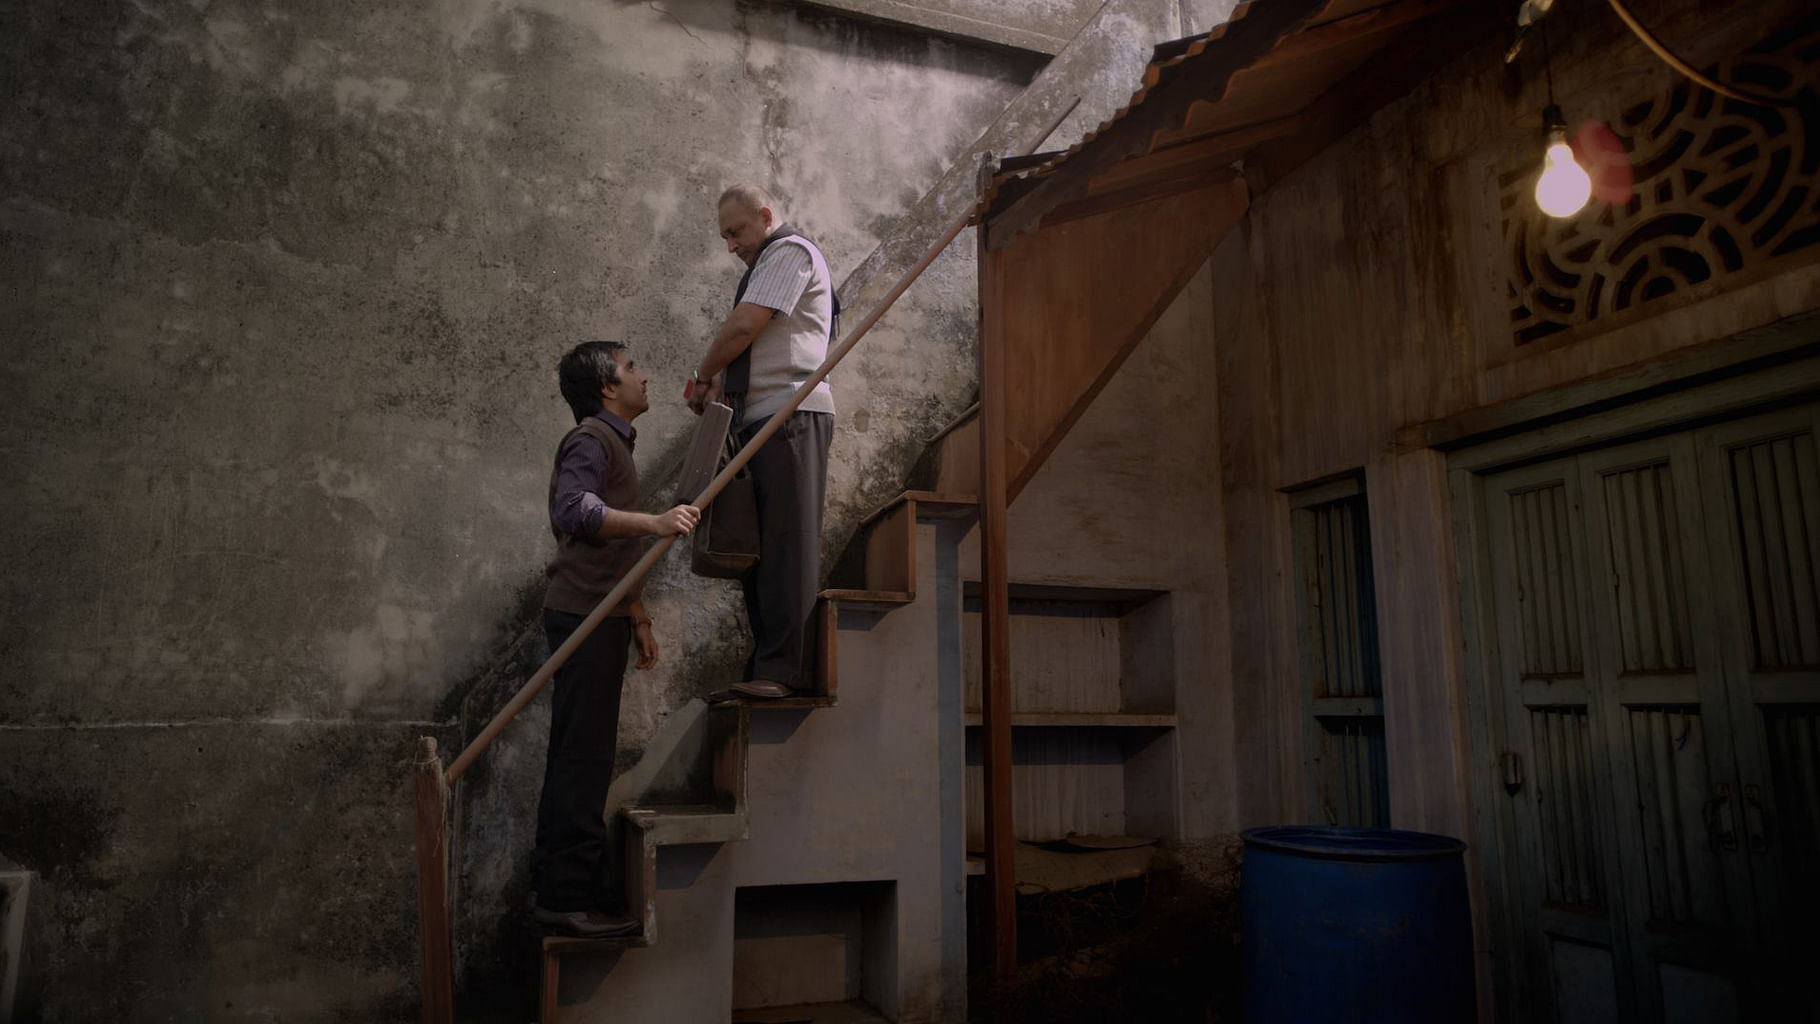 Written and directed by Sandeep Modi, <i>Vanvaas </i>(<i>The Exile</i>) is an 8-minute-long film about the father-son equation. (Photo Courtesy: <a href="https://www.facebook.com/vanvaastheshortfilm/timeline">Facebook.com/Vanvaas</a>)